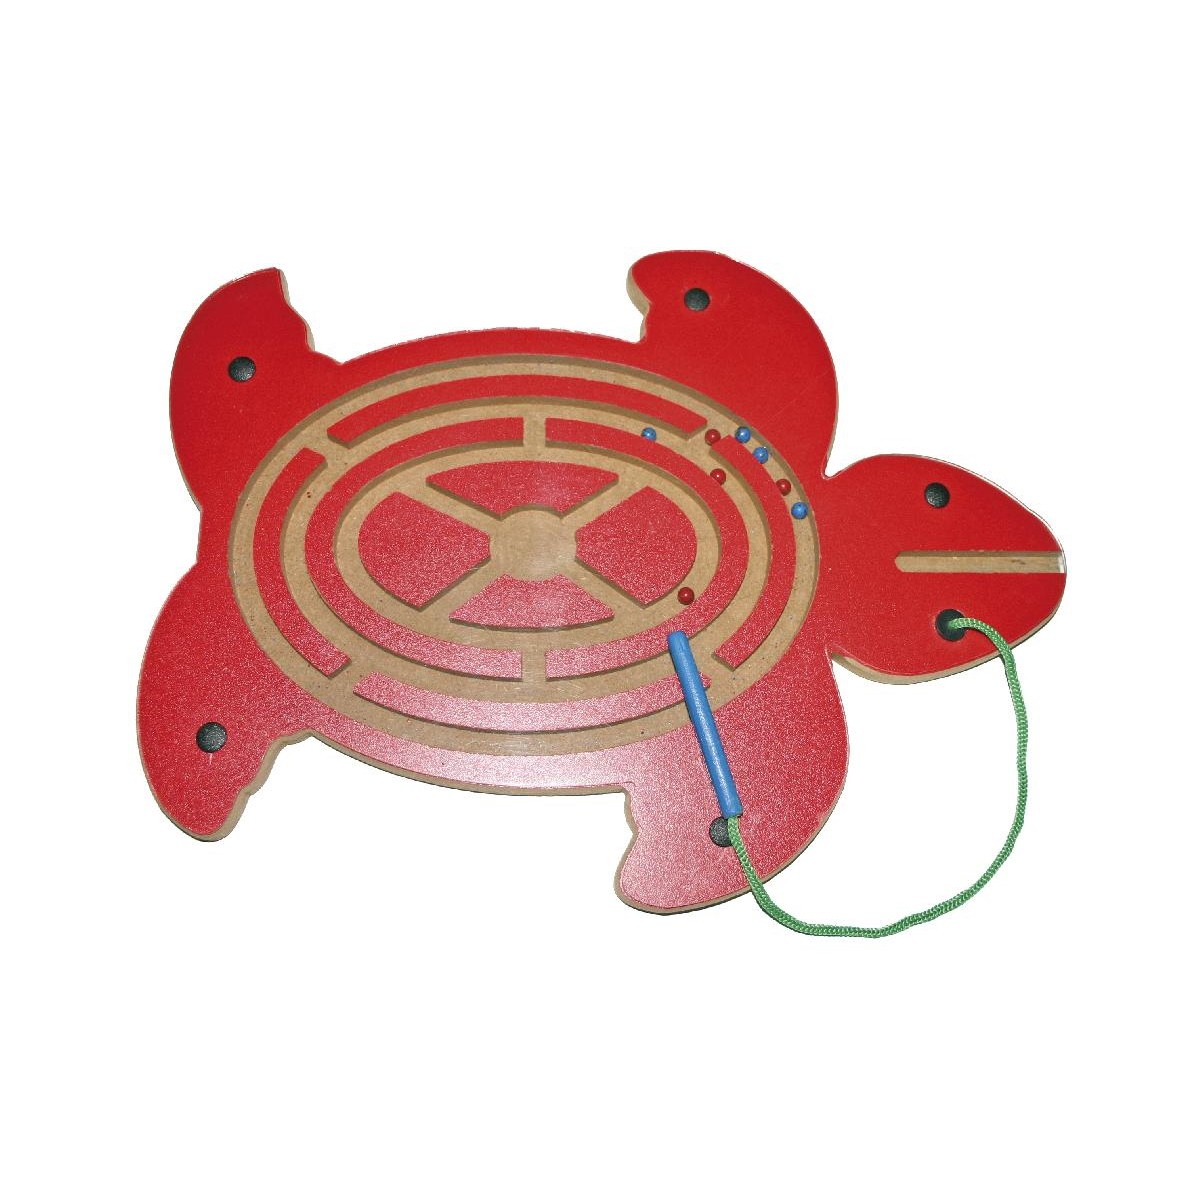 Magnetic play turtle incl. 1 pen - Dimensions: 40x29x1,5cm - 38,20